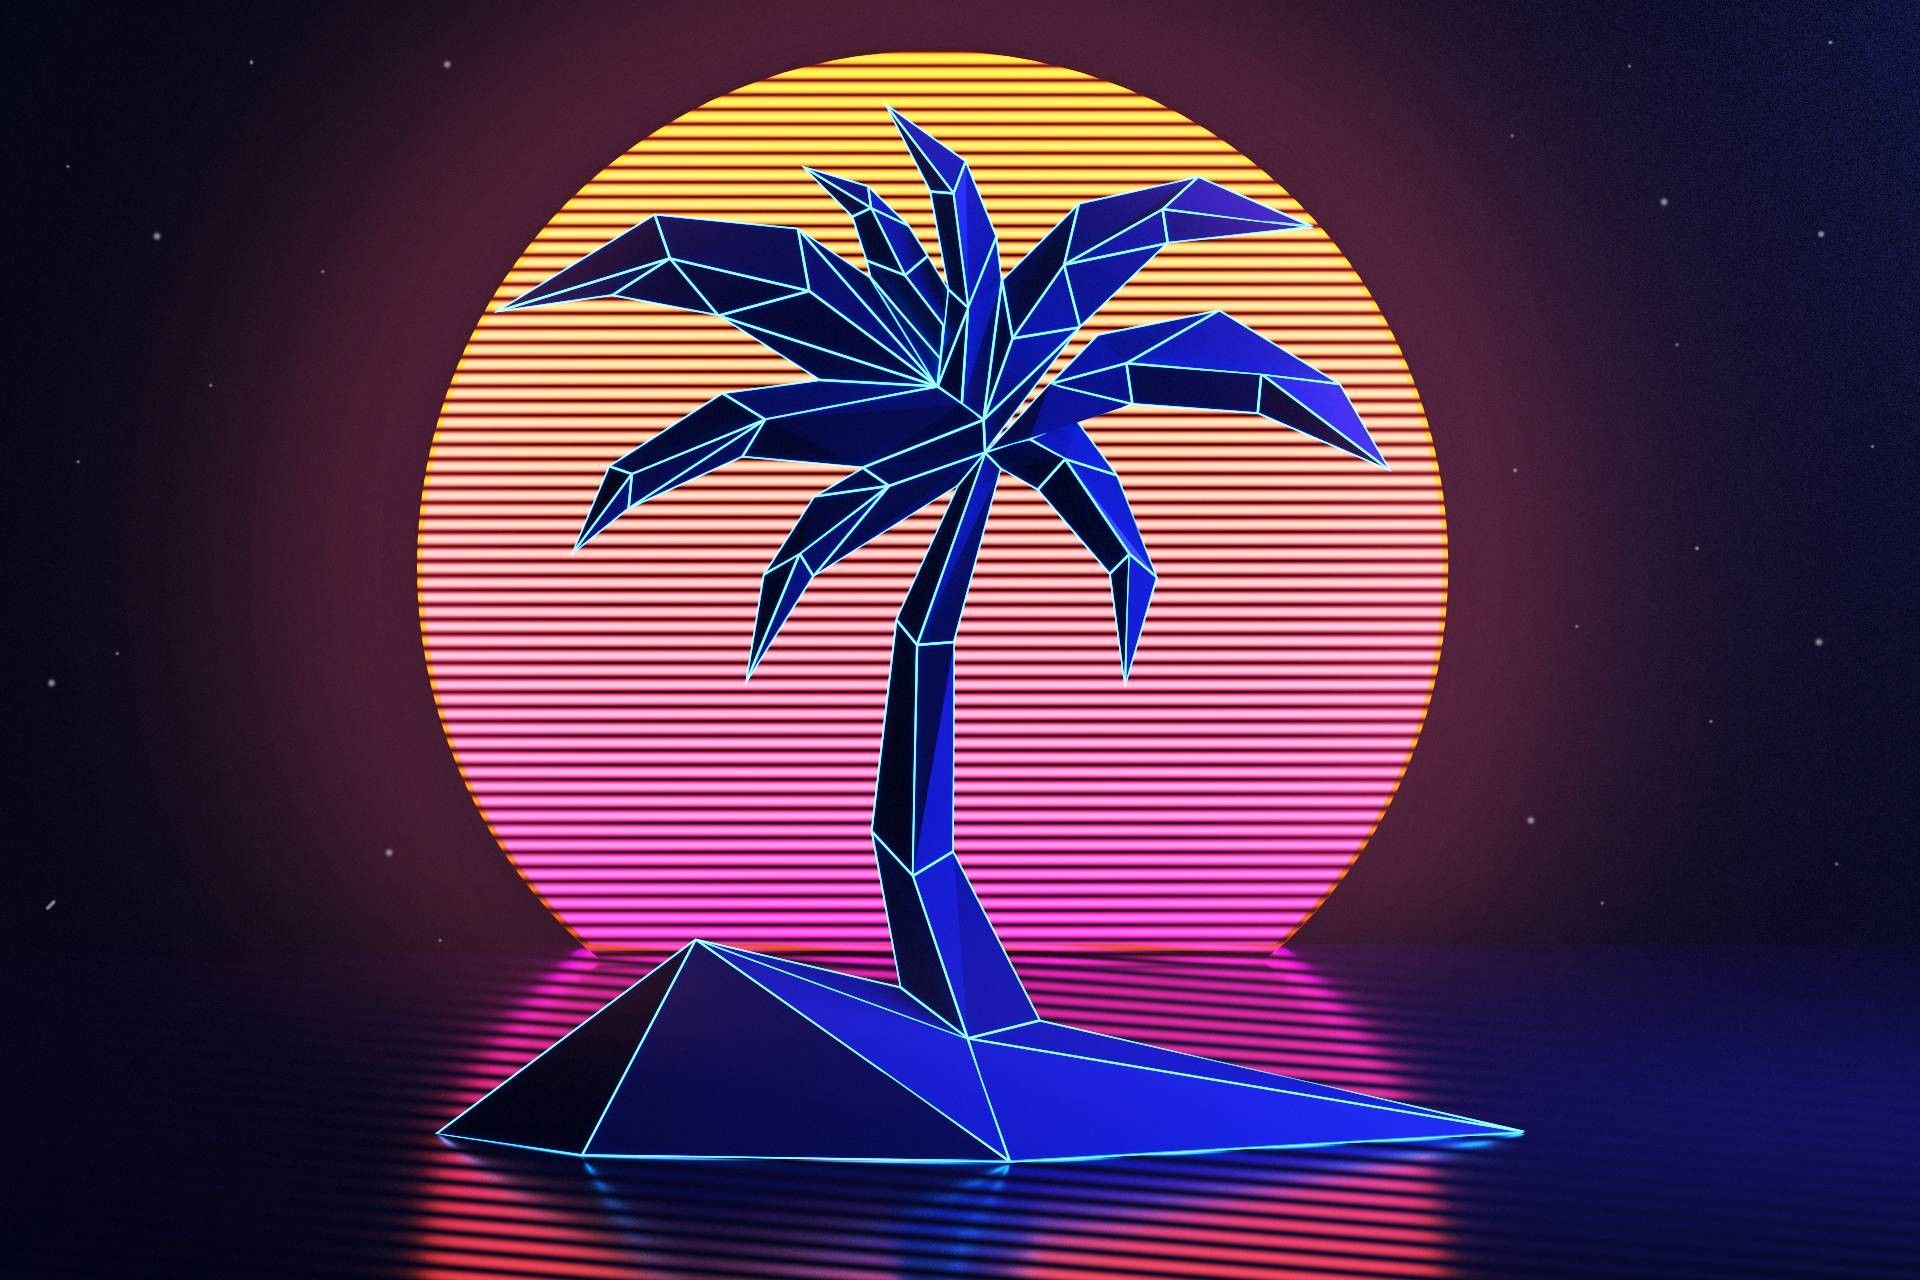 A palm tree in front of a sun in the style of 80s sci-fi art. - Low poly